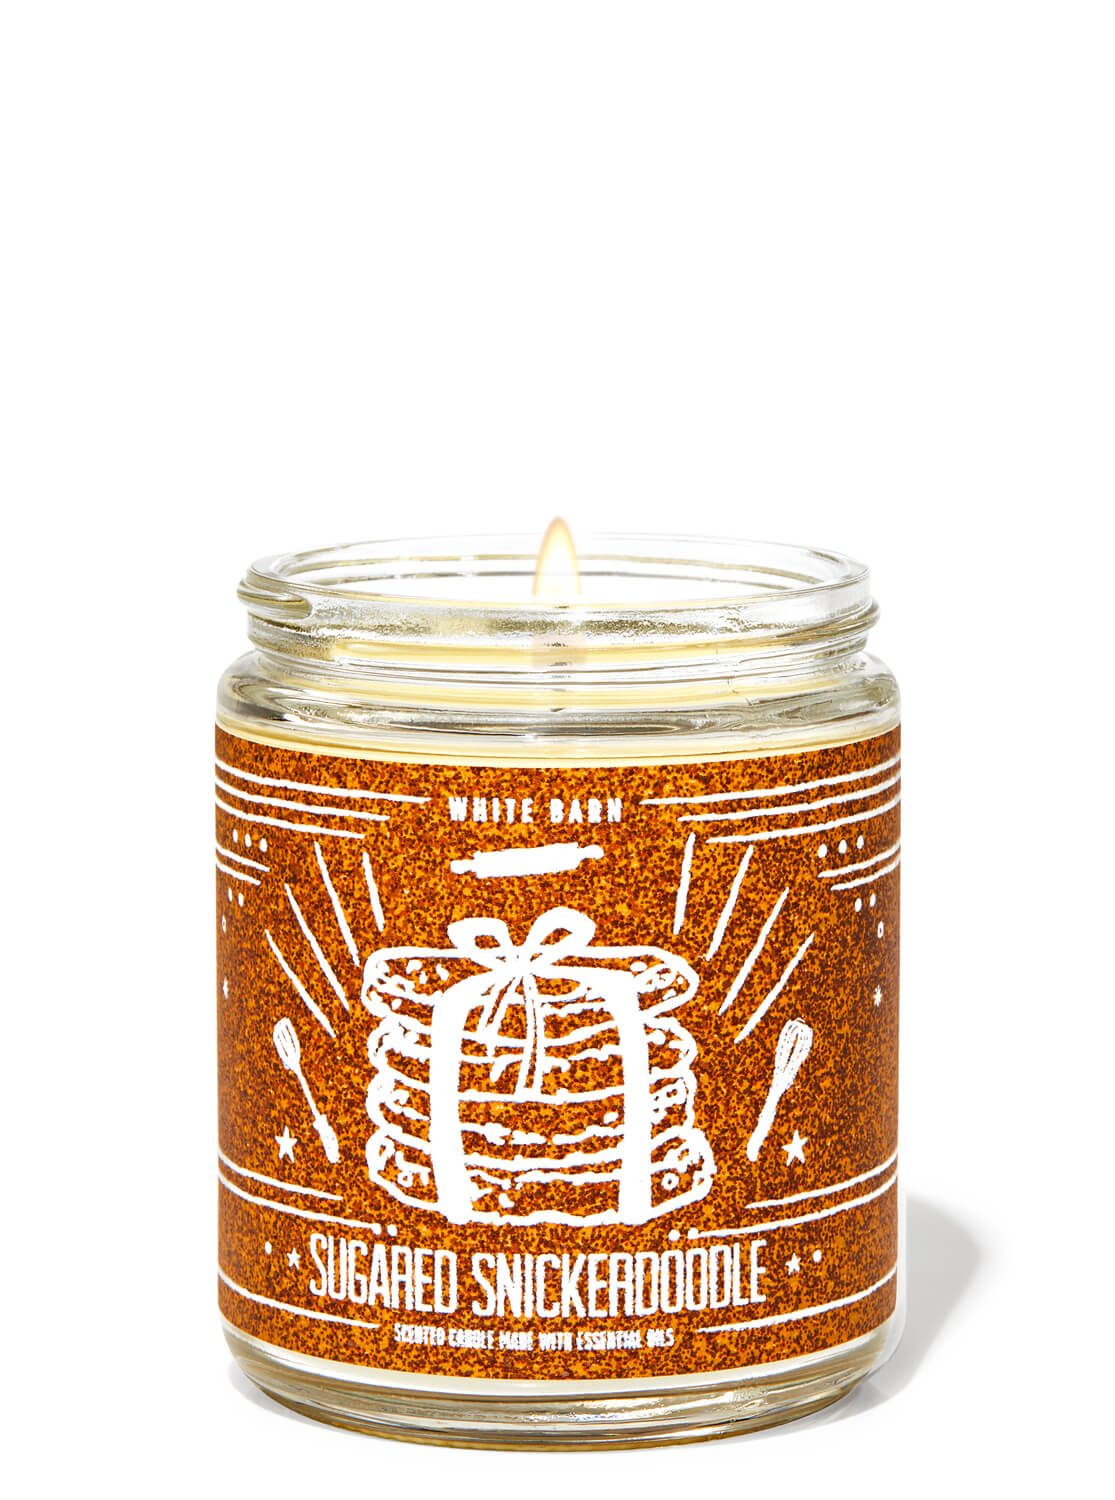 Bath & Body Works Sugared Snickerdoodle Single Wick Candle